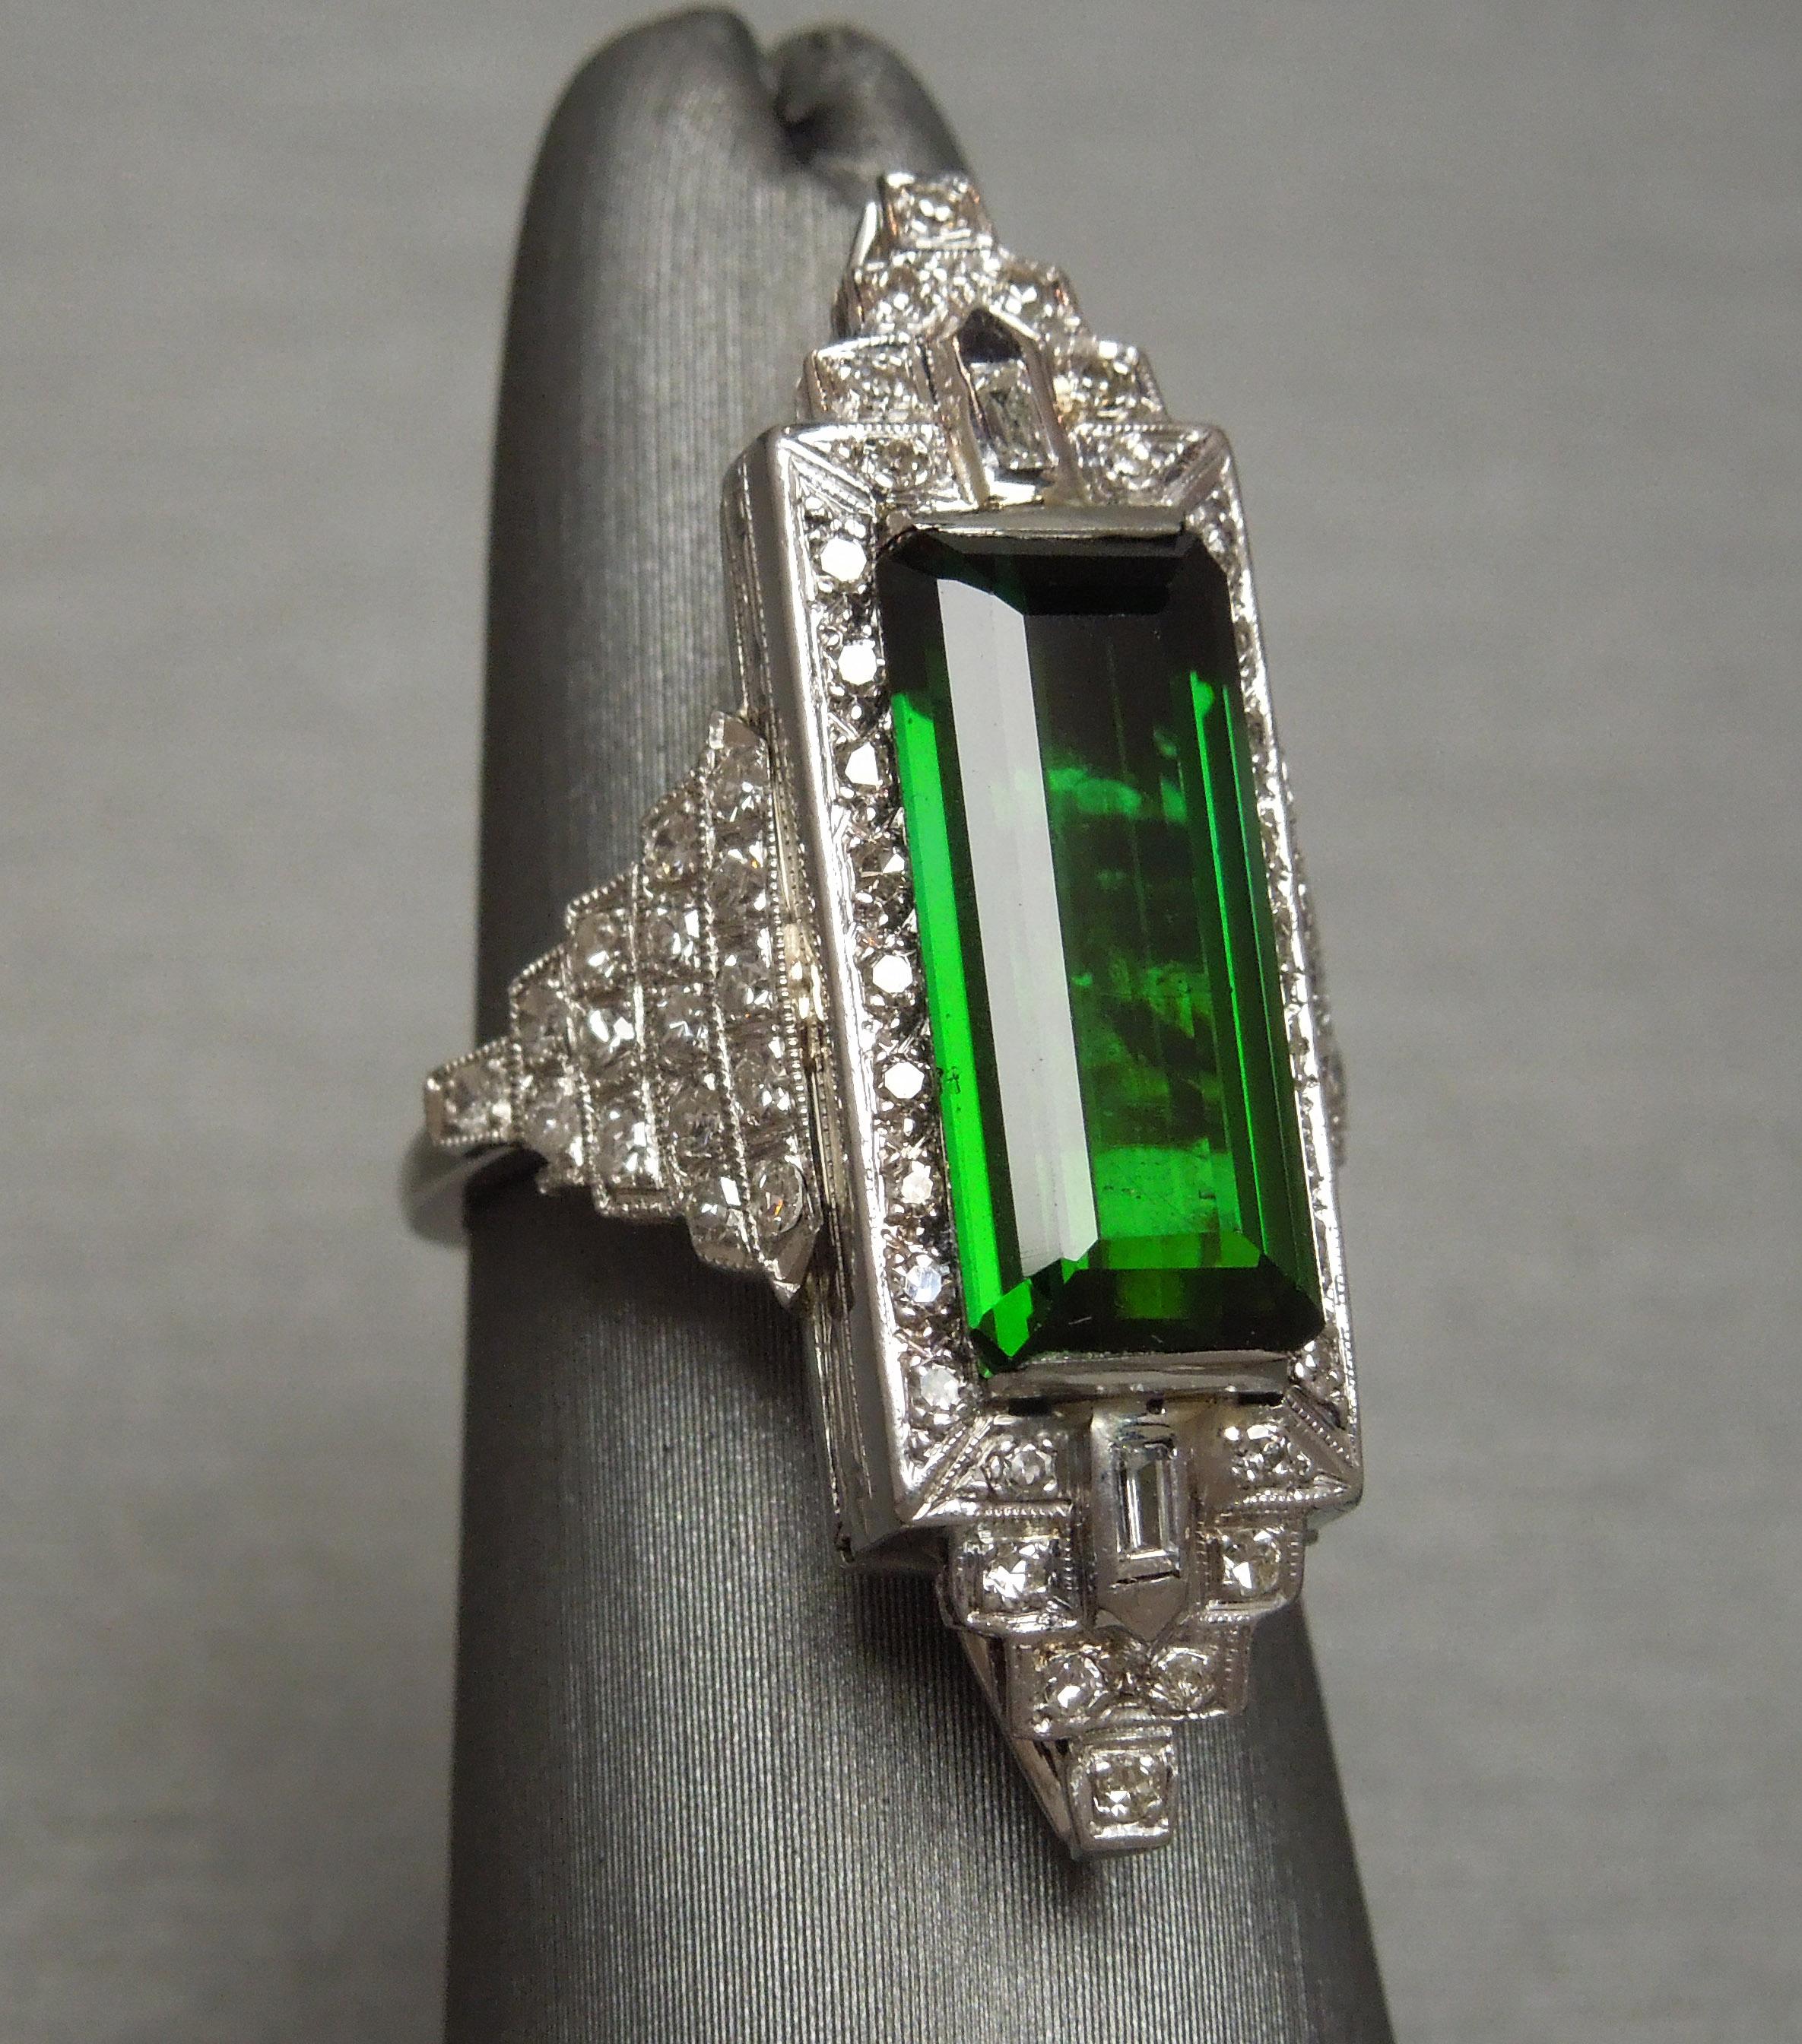 Constructed in the manner of a 1920s Art Deco period ring, this Tourmaline solitaire statement ring features a Central 11 carat Elongated Emerald cut Natural Intense Green Tourmaline at 16.5mm in length x 7.1mm in width. Bordering Tourmaline are a